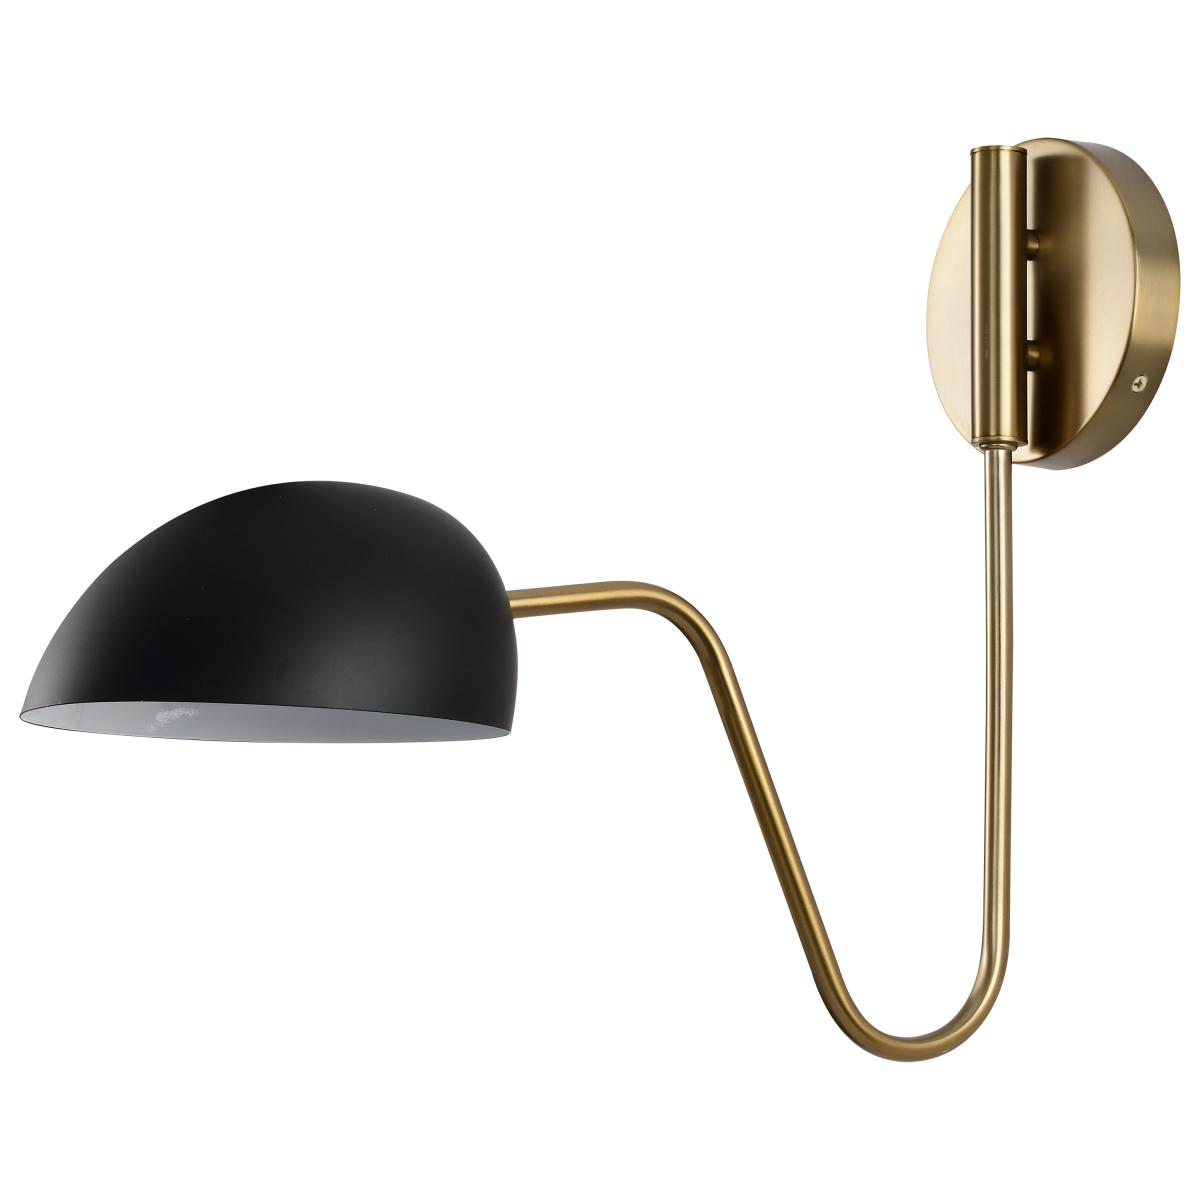 60-7391 TRILBY 1 LIGHT WALL SCONCE